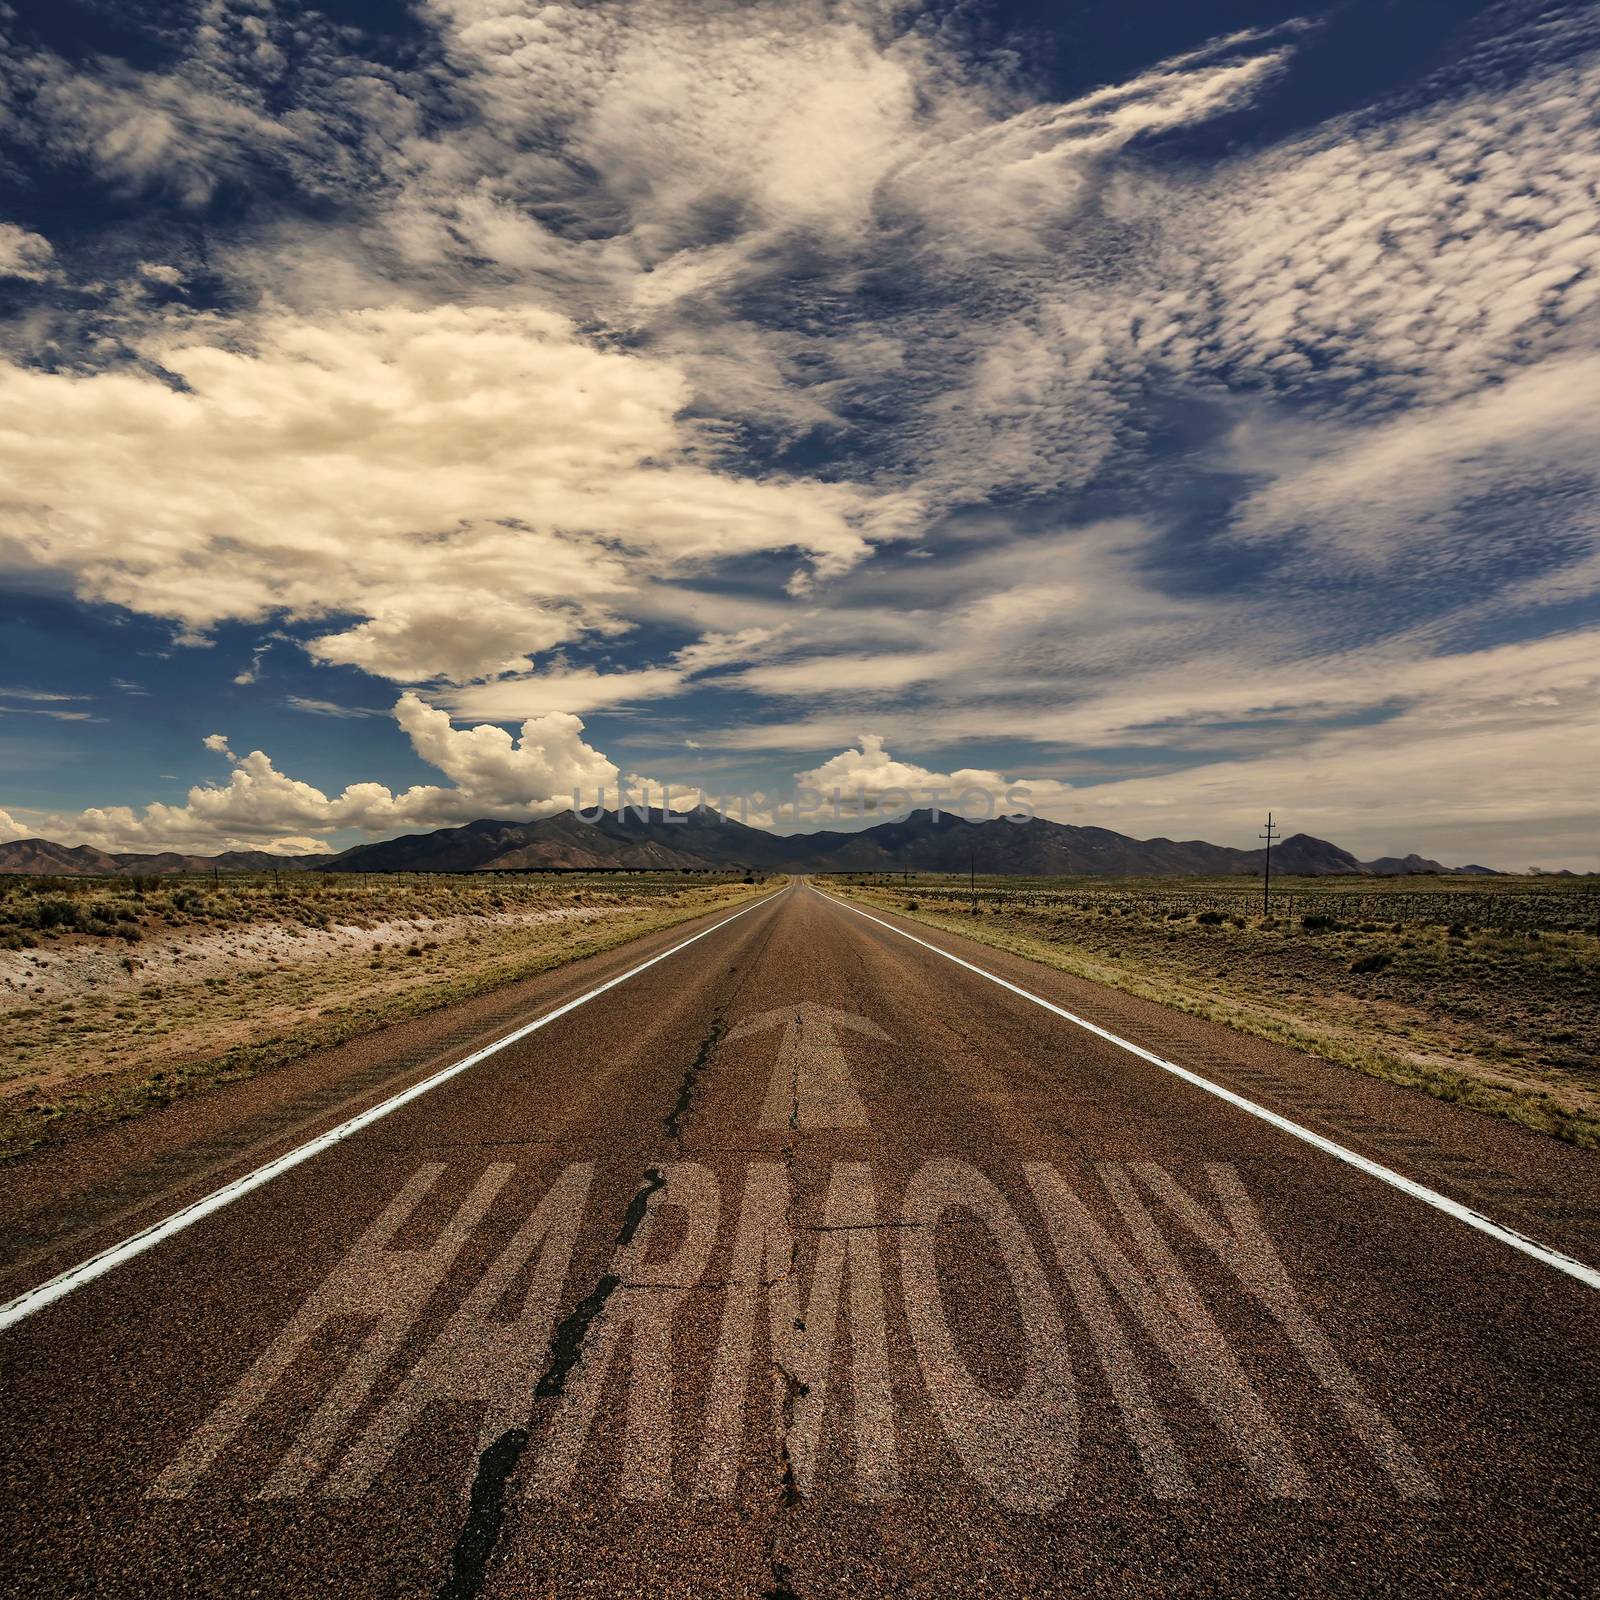 Conceptual image of desert road with the word harmony and arrow